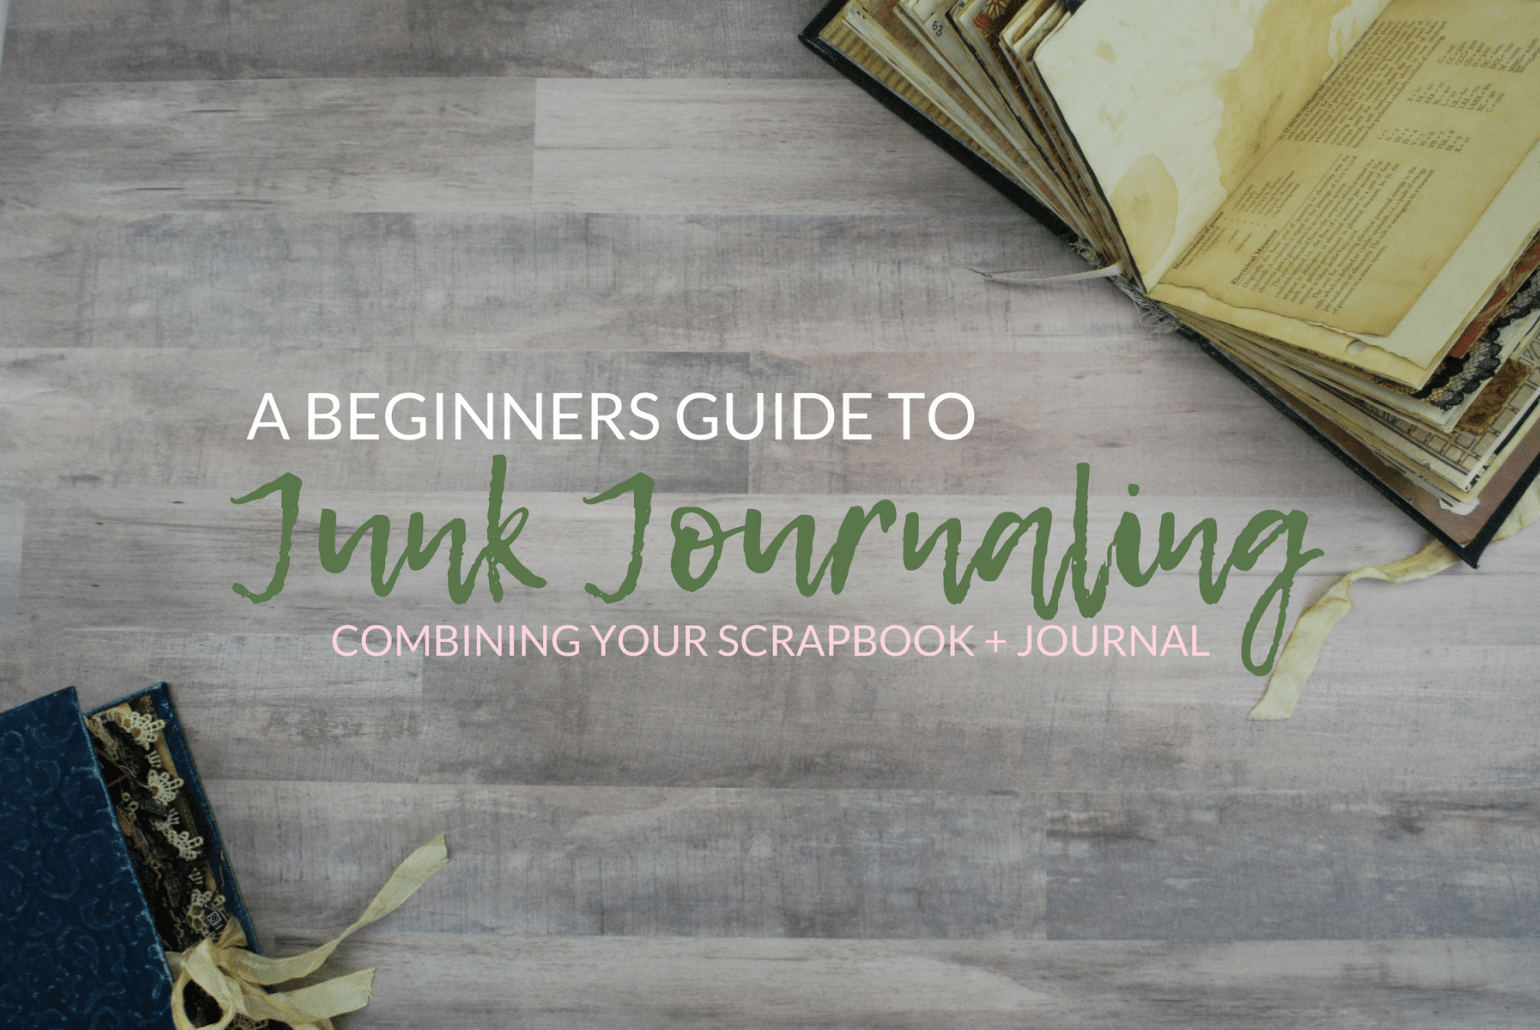 A Beginners Guide to Junk Journaling